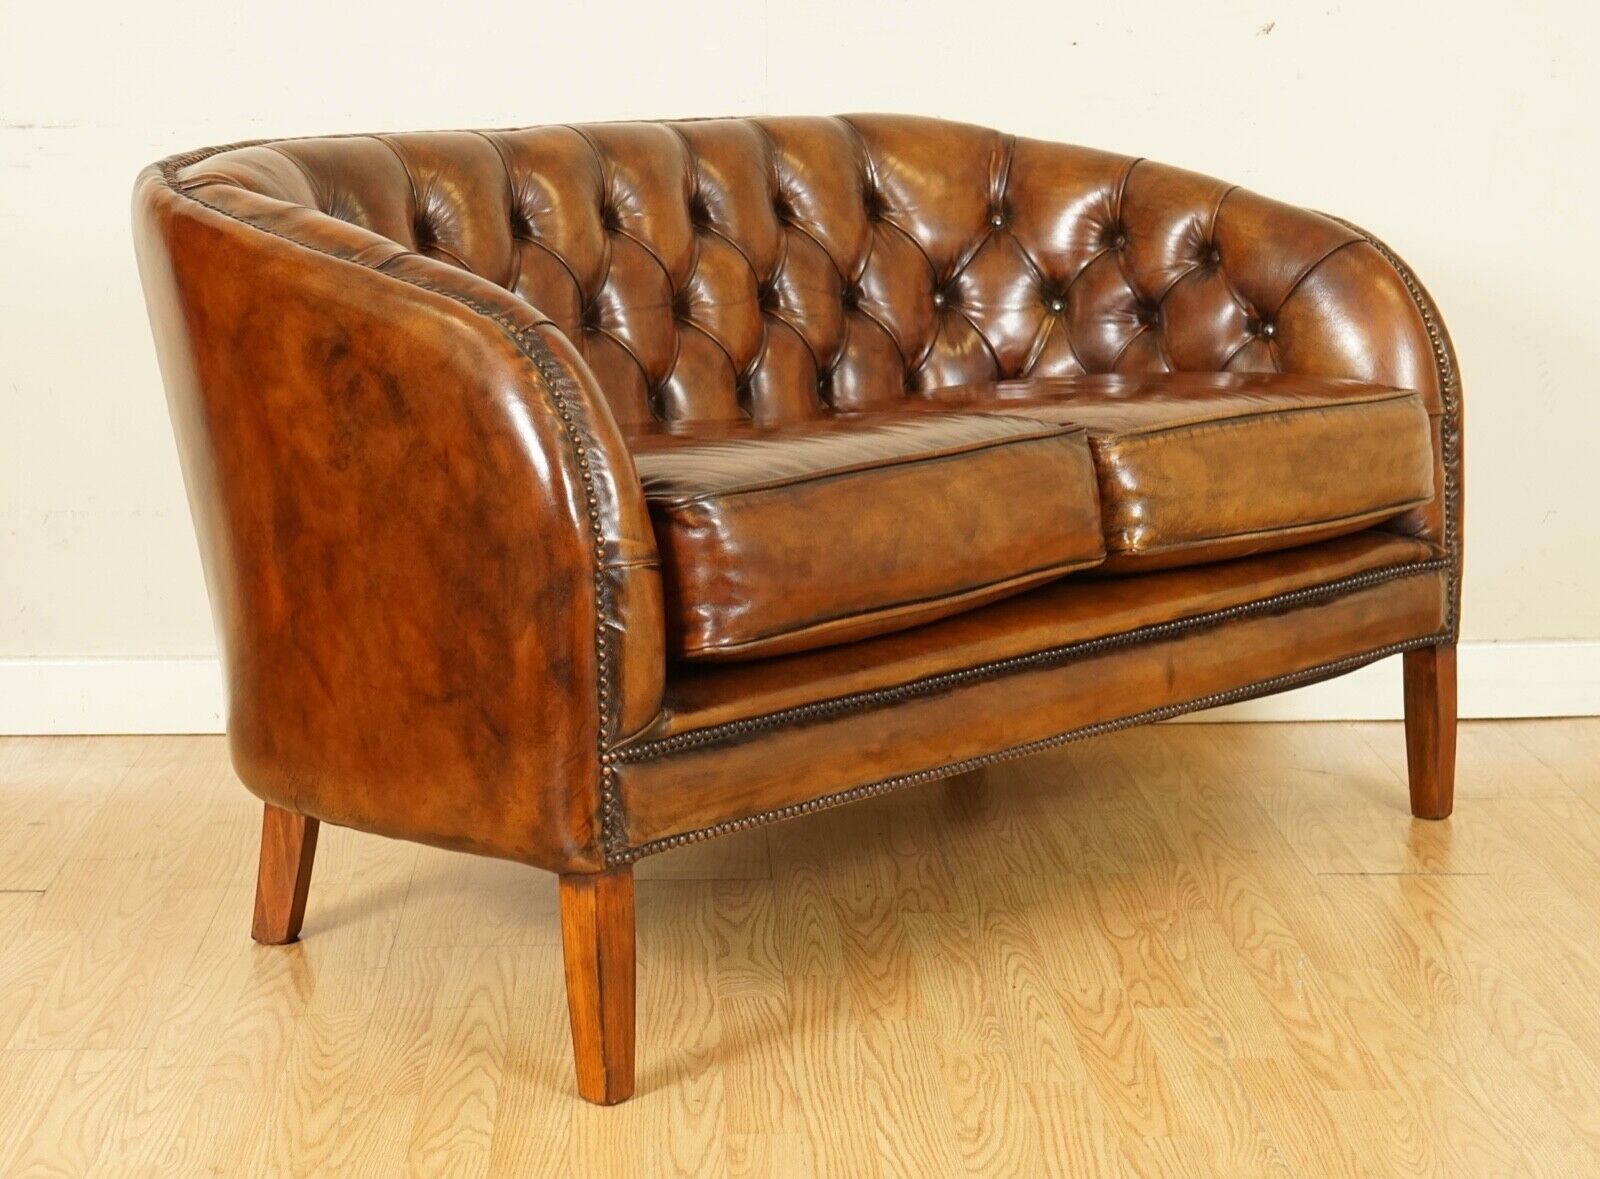 STUNNING FULLY RESTORED HAND DYED WHISKEY BROWN LEATHER TWO SEATER SOFA (1/2)